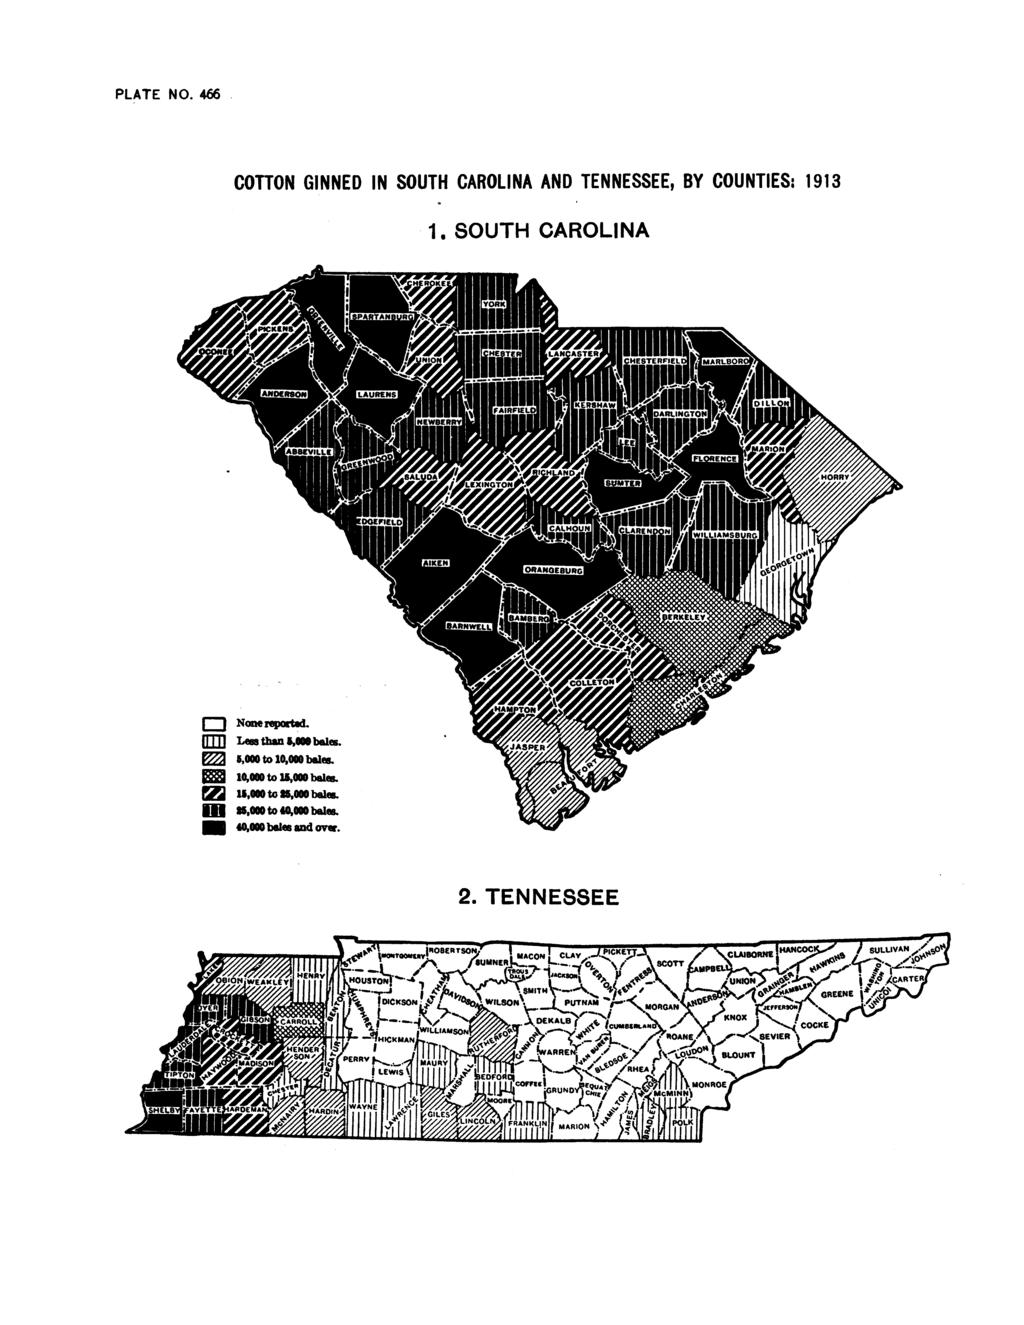 PLATE NO. 466 COTTON GINNED IN SOUTH CAROLINA AND TENNESSEE, BY COUNTIES: 1913 1. SOUTH CAROLINA I I None reported.